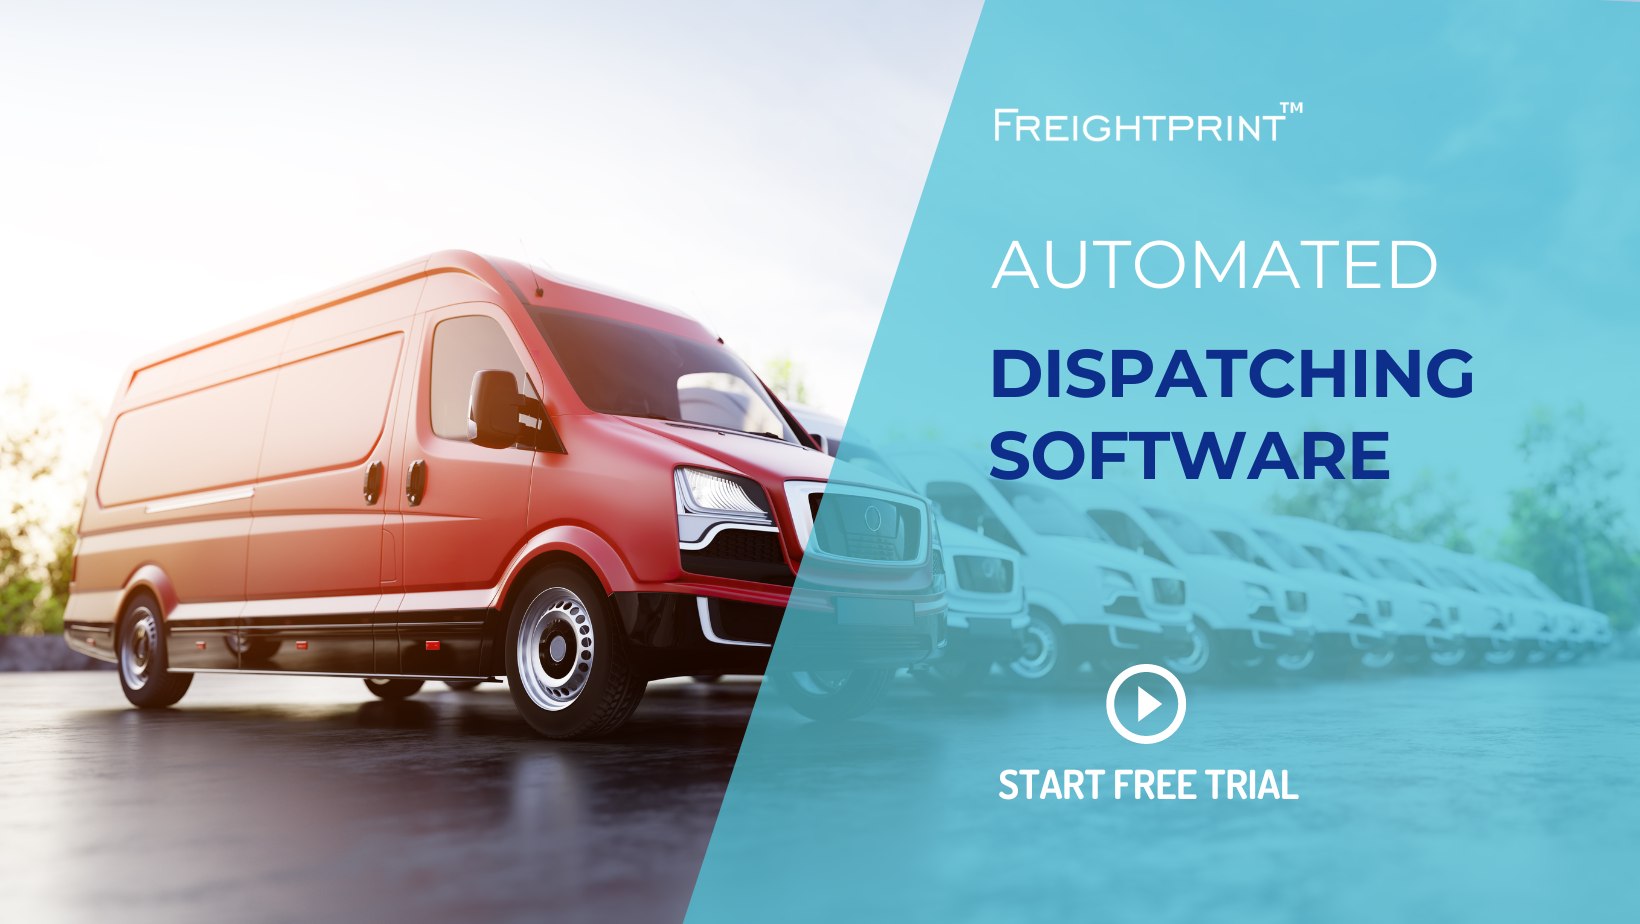 https://freightprint.com/blog/view/u/how-to-implement-automated-dispatching-in-your-operations